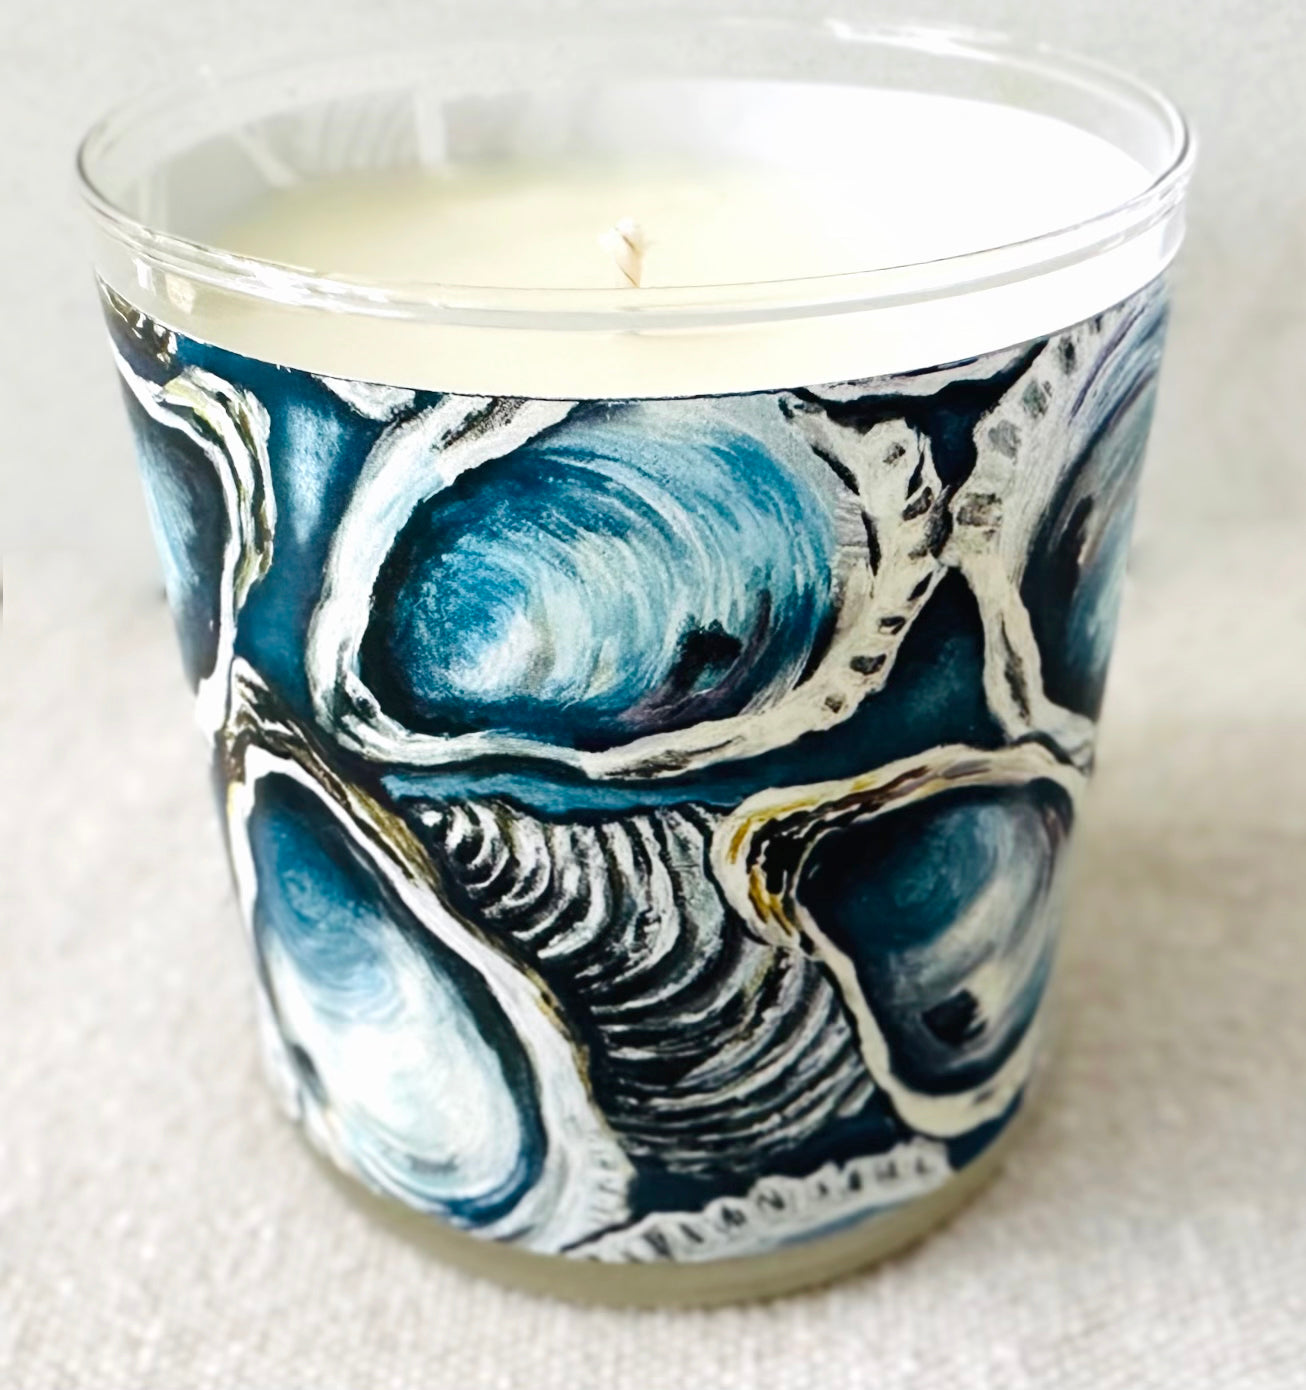 11 oz oyster soy candle